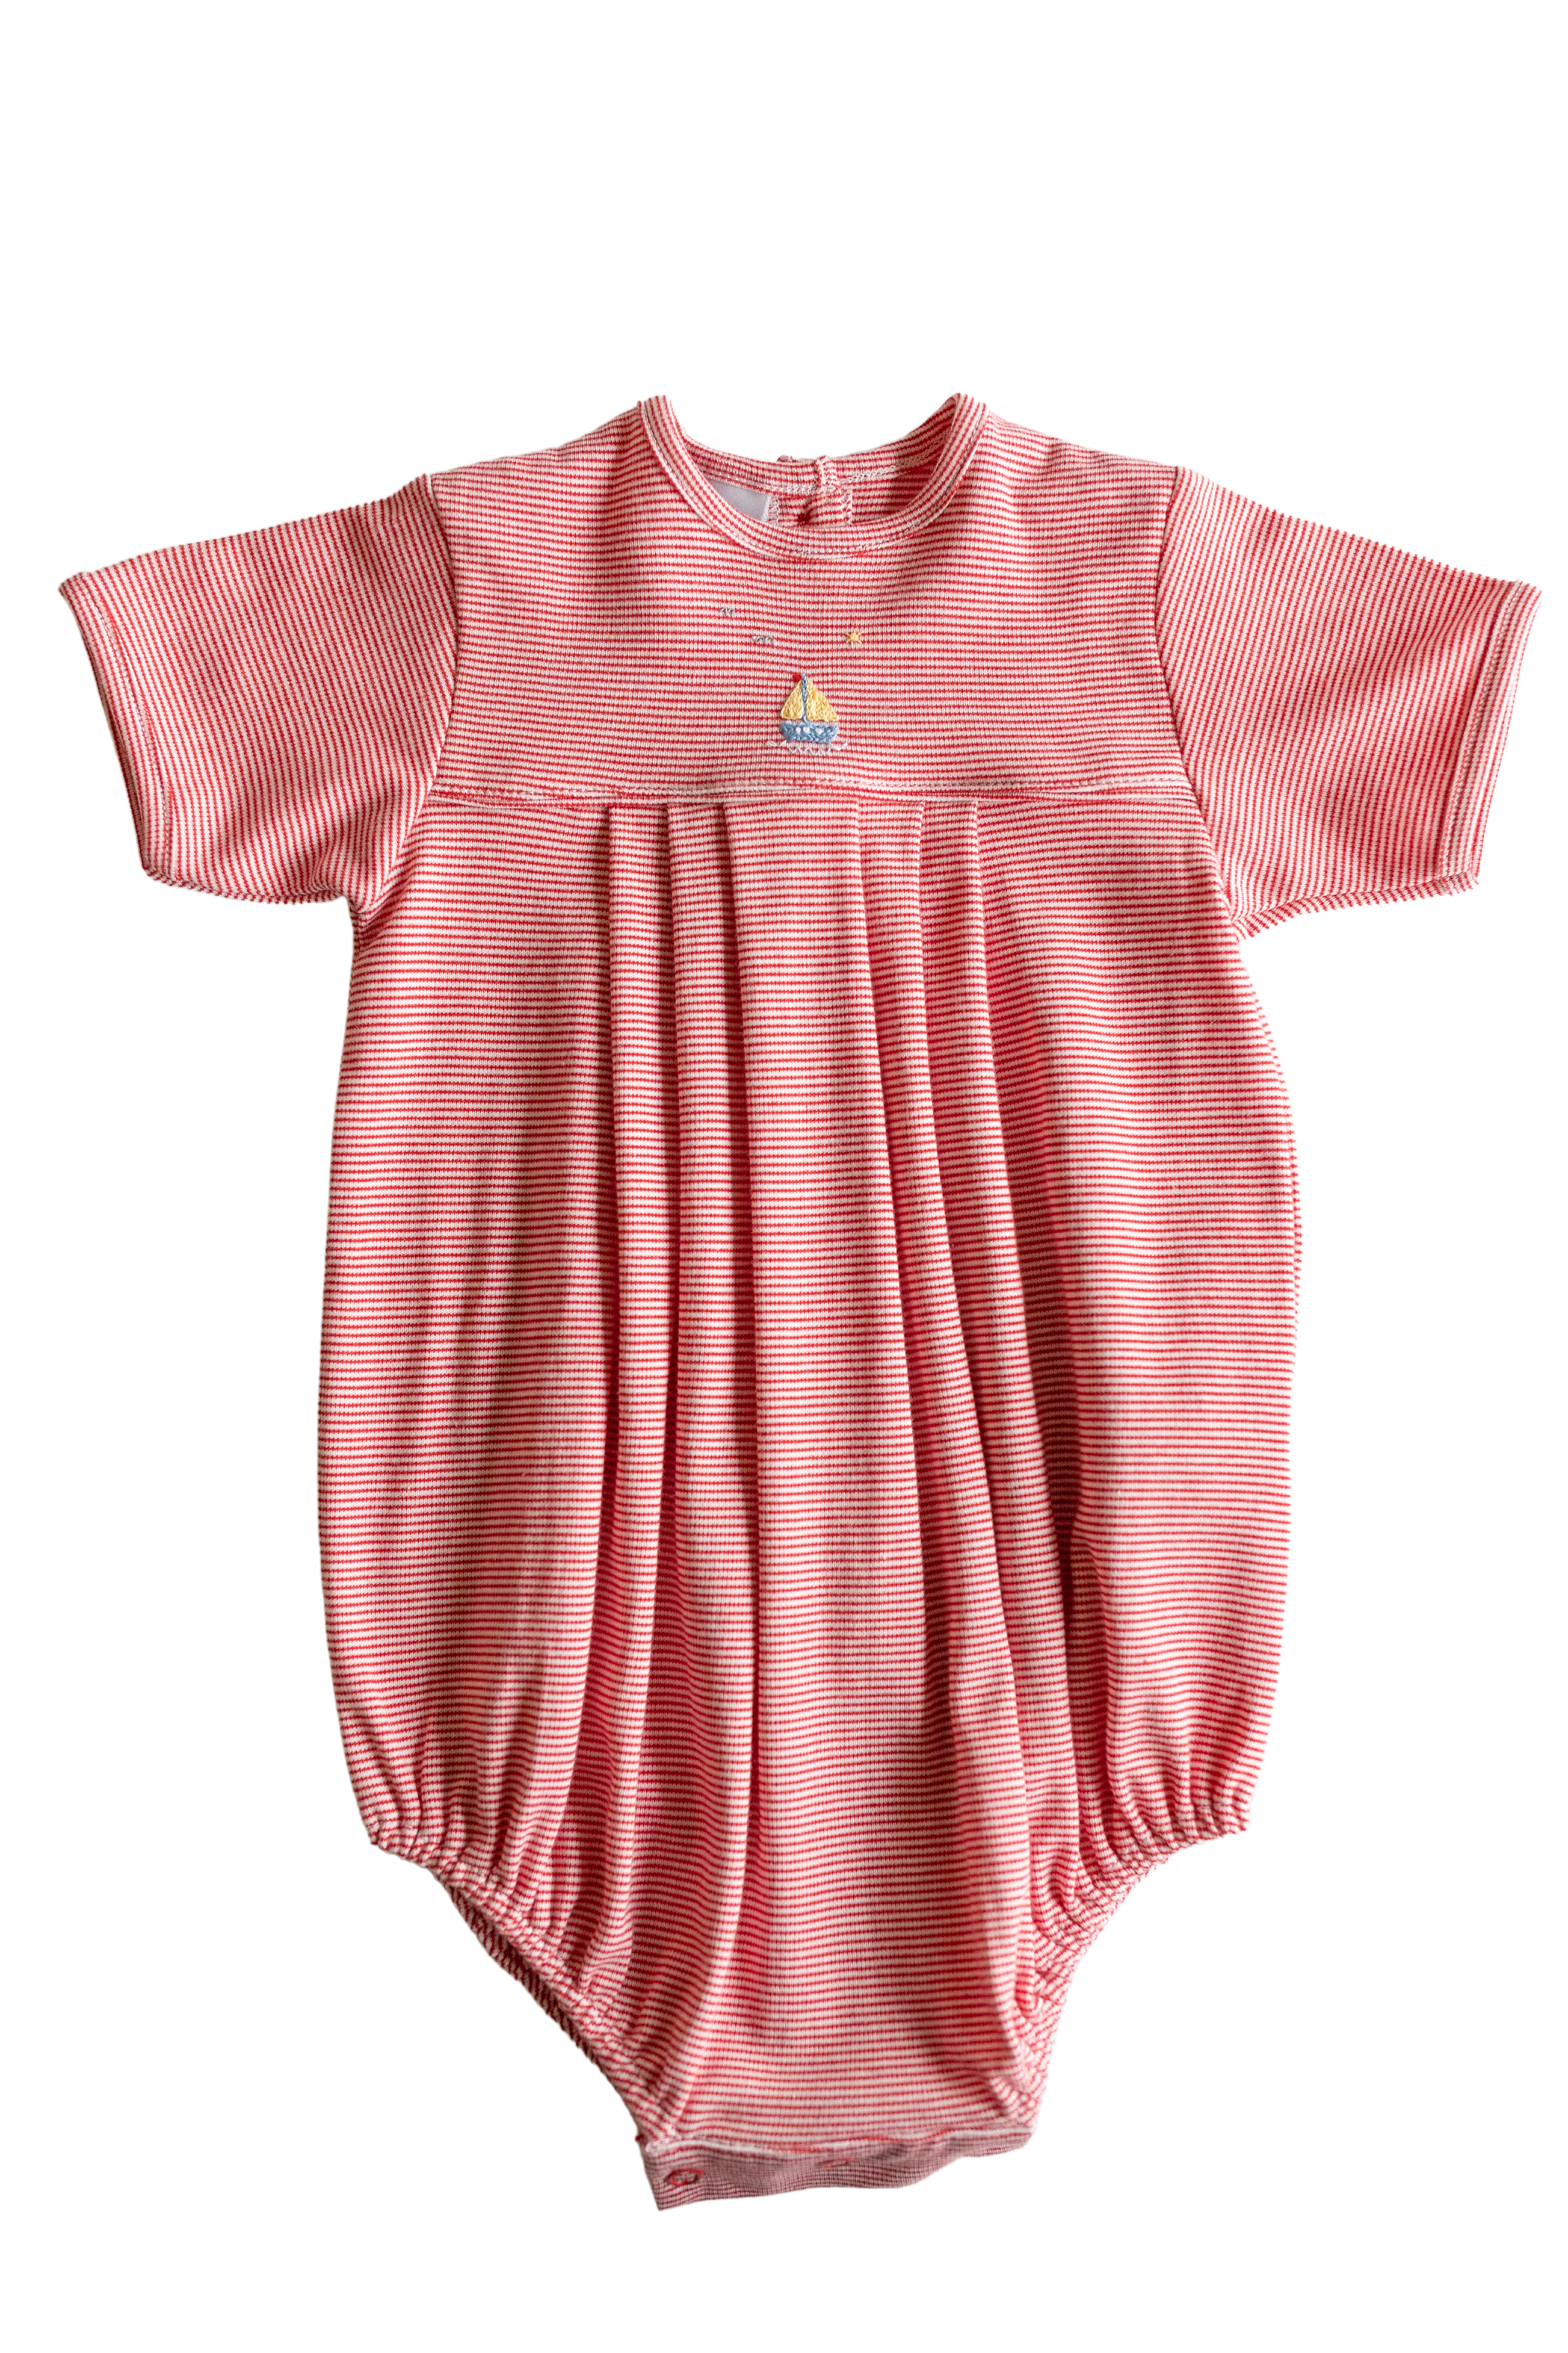 Sailboat & Seagulls Pleated Romper (Baby)